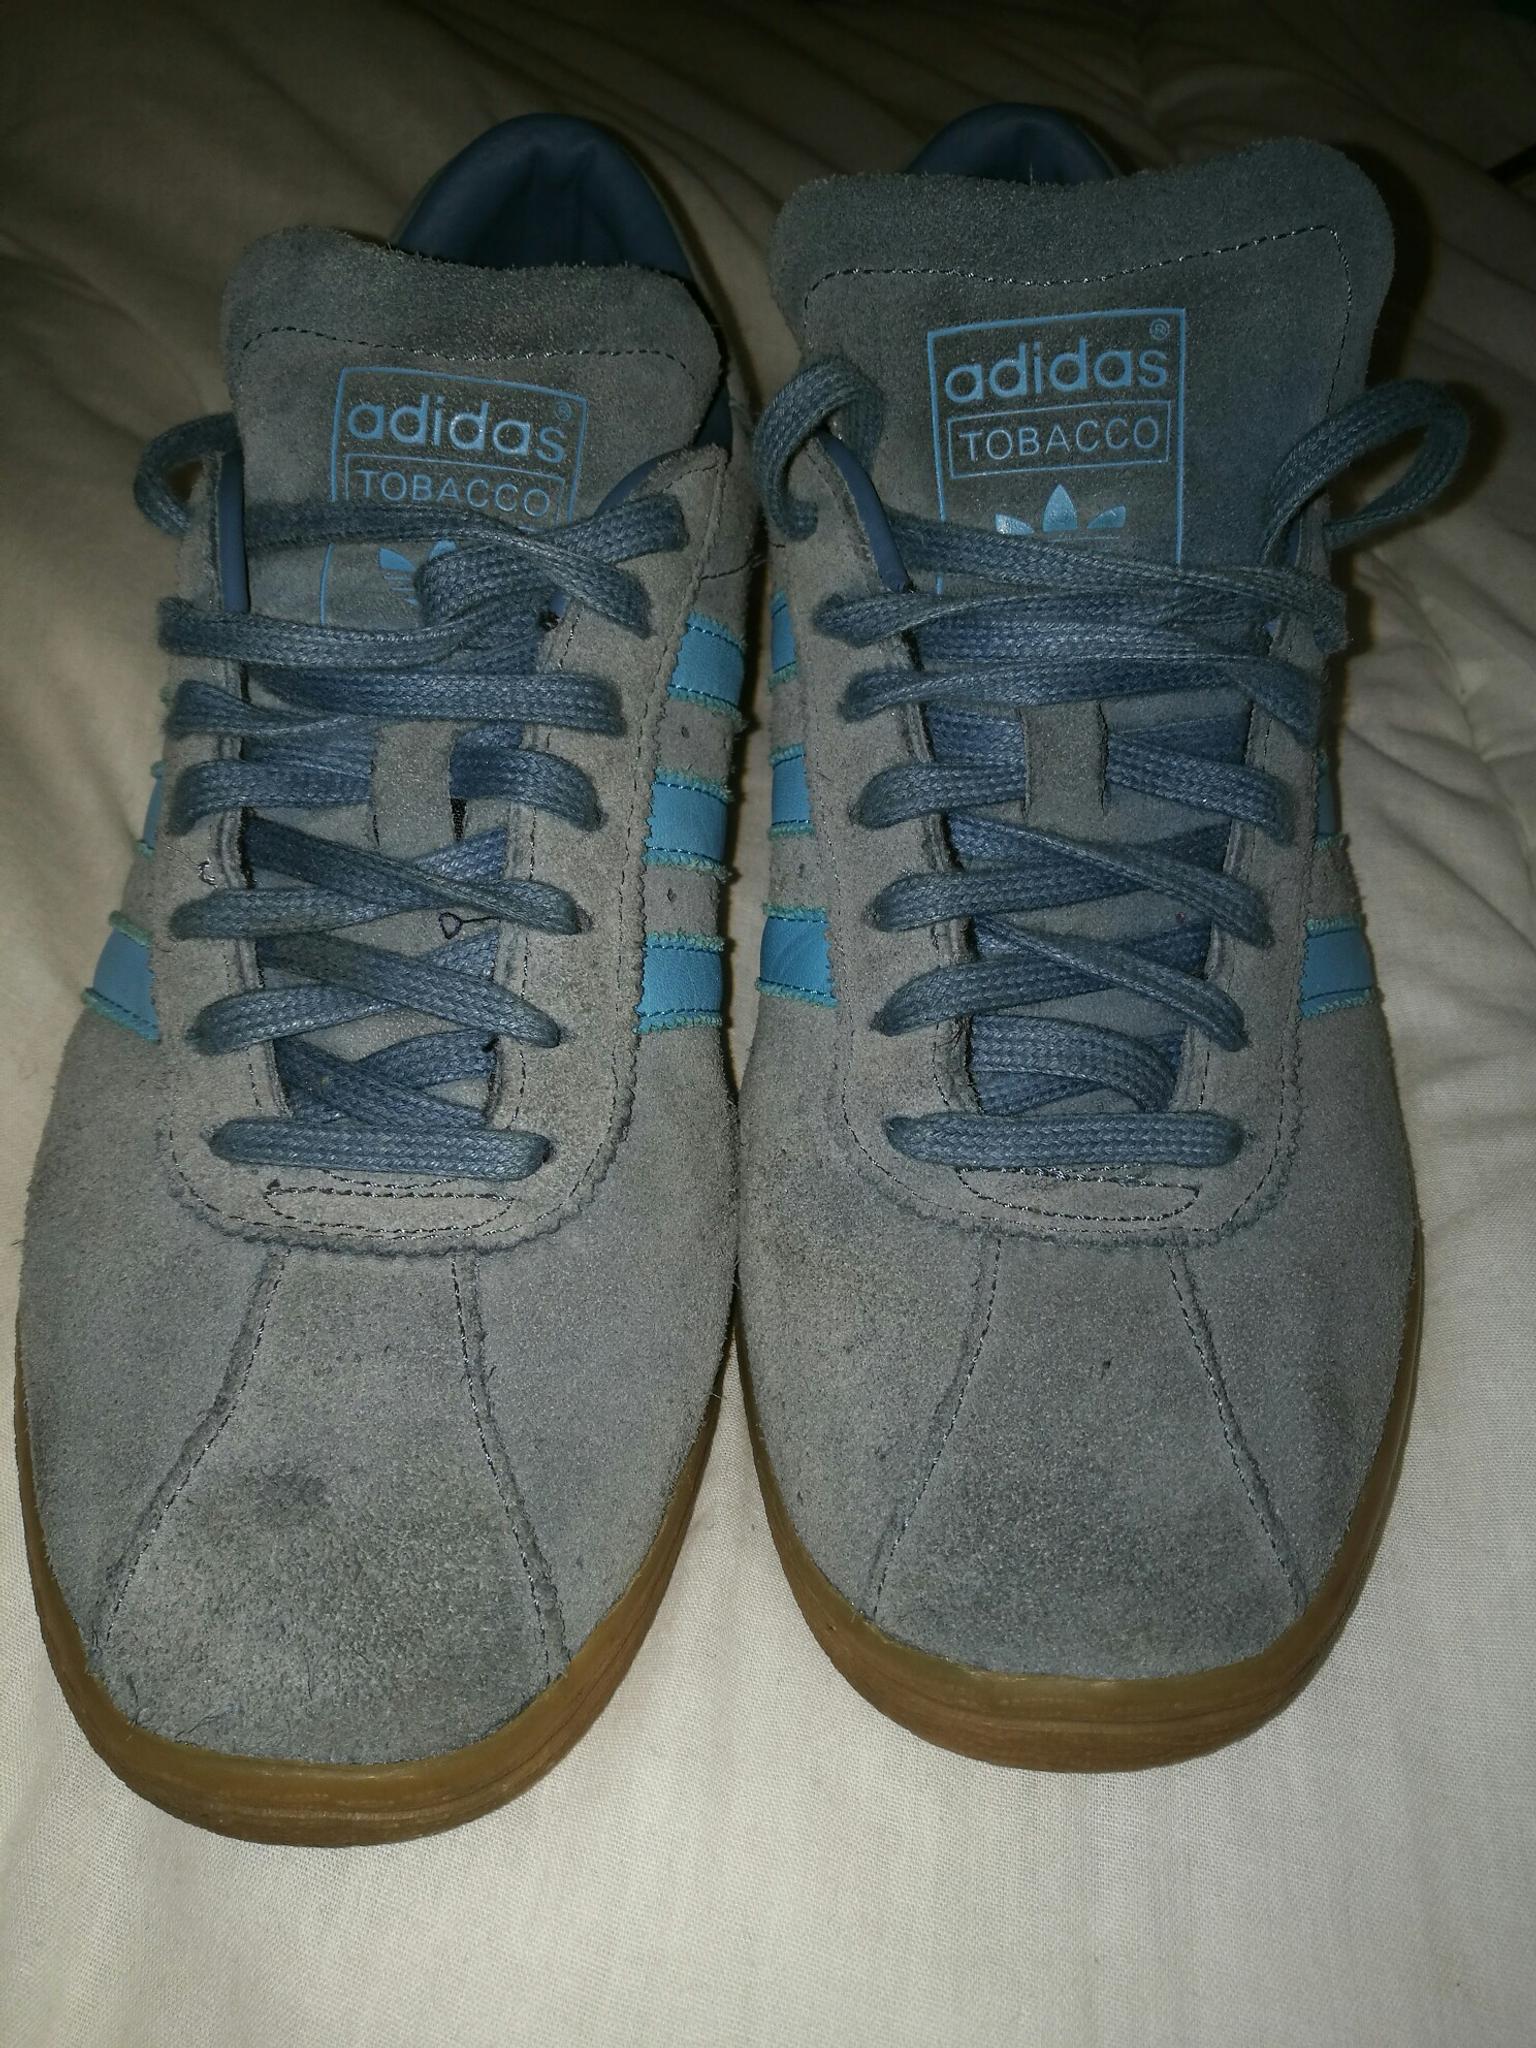 Adidas tobacco size 9 in DE55 Bolsover for £20.00 for sale | Shpock